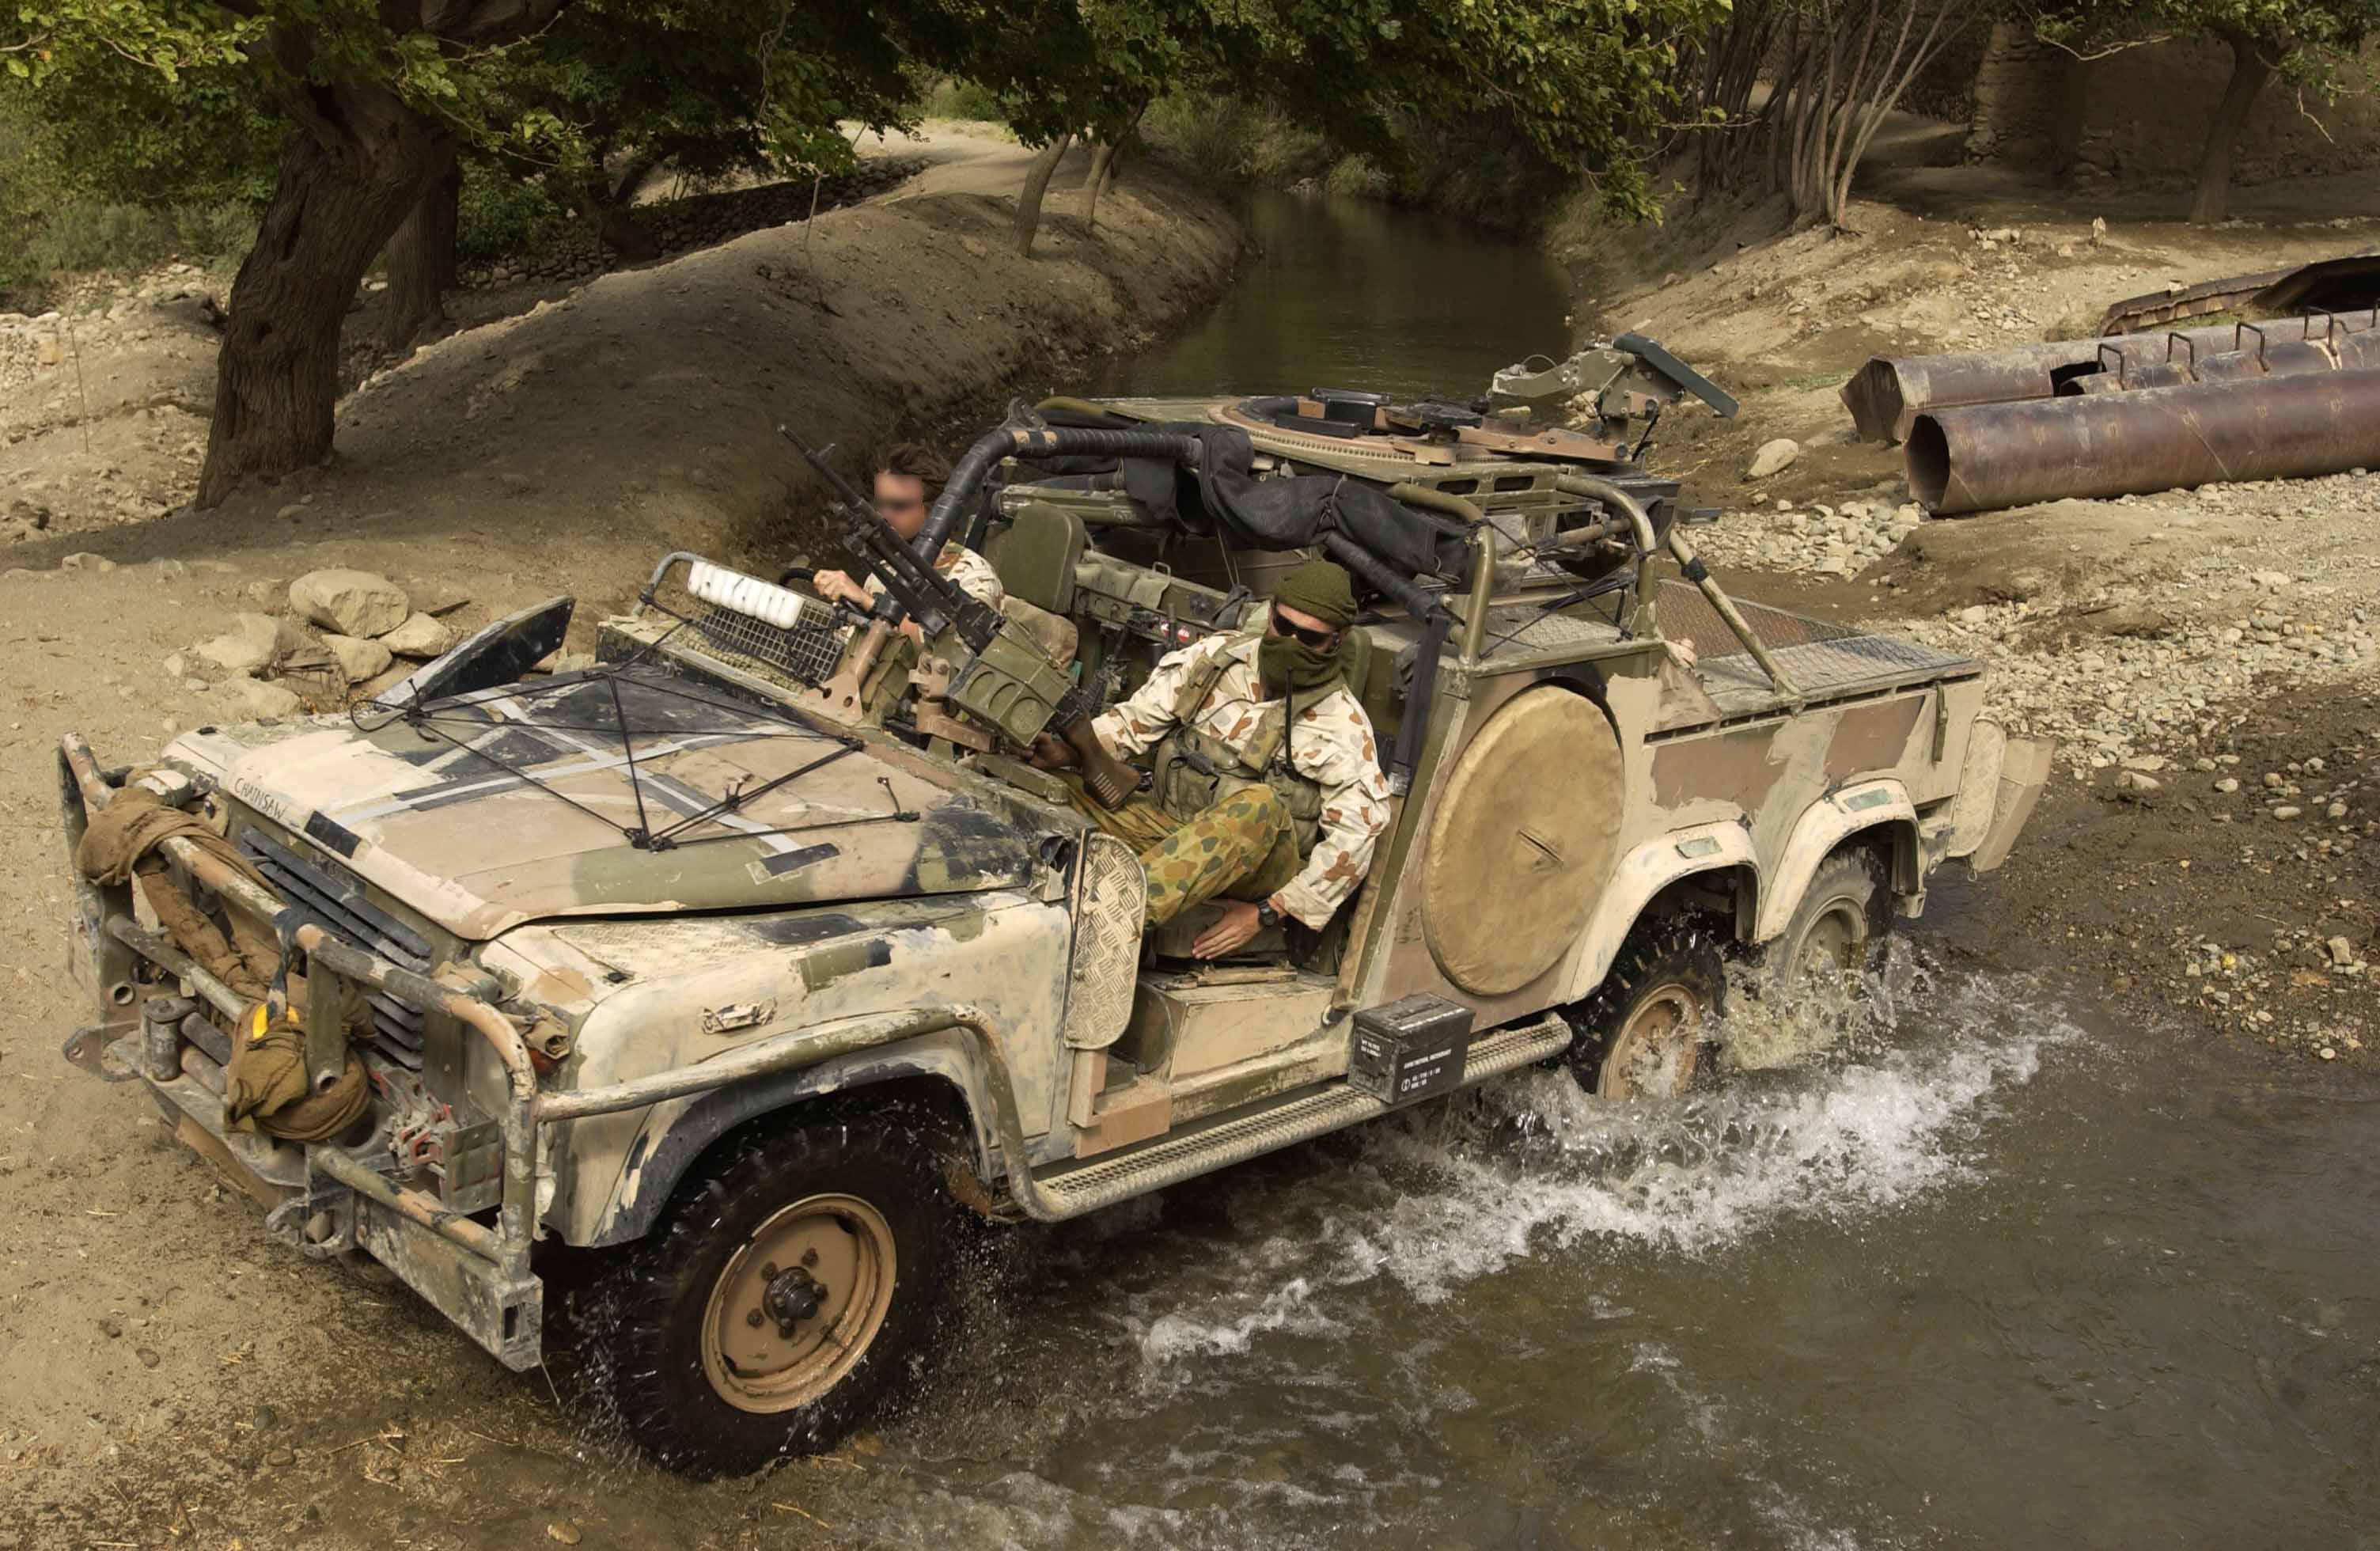 soldiers, army, Land Rover - desktop wallpaper